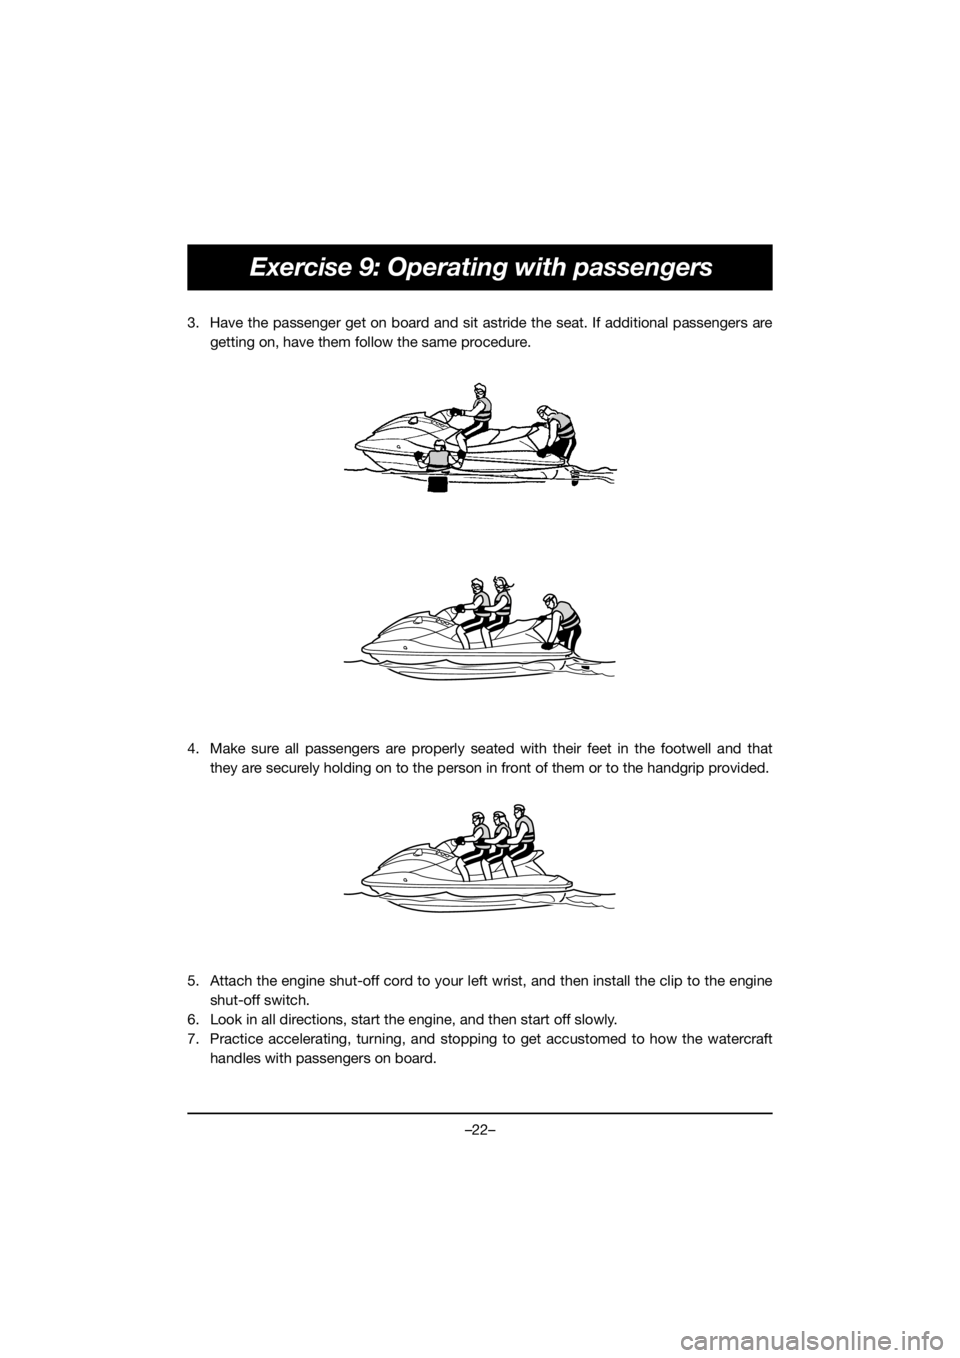 YAMAHA EX SPORT 2020  Notices Demploi (in French) –22–
Exercise 9: Operating with passengers
3. Have the passenger get on board and sit astride the seat. If additional passengers are
getting on, have them follow the same procedure. 
4. Make sure 